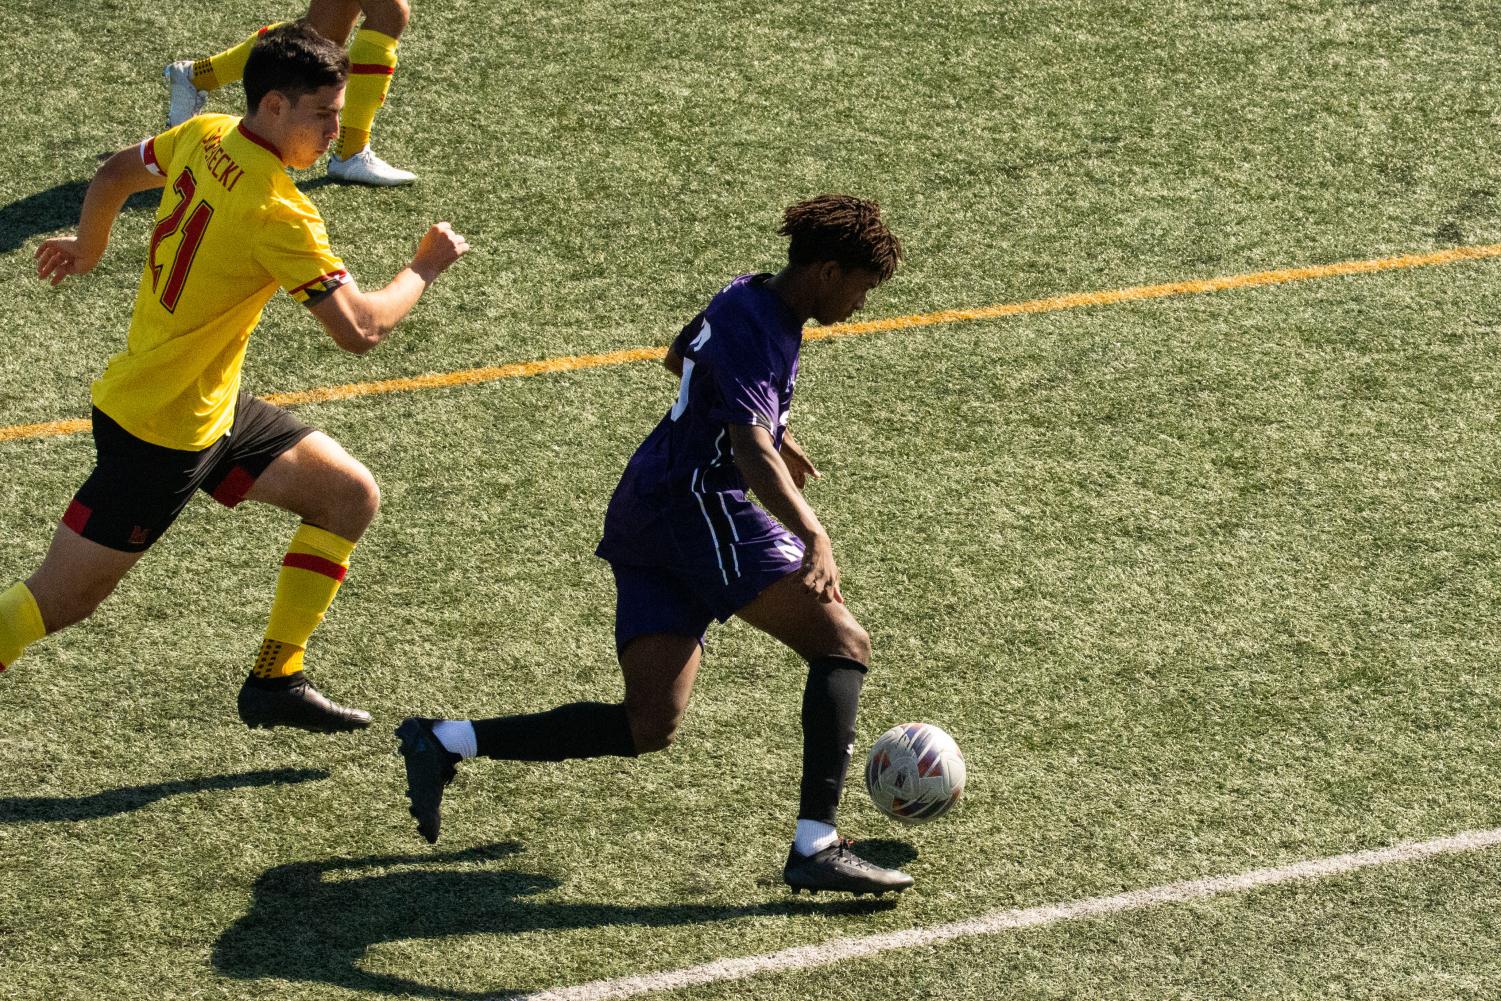 A+soccer+player+in+a+purple+jersey+and+purple+shorts+dribbles+a+ball.